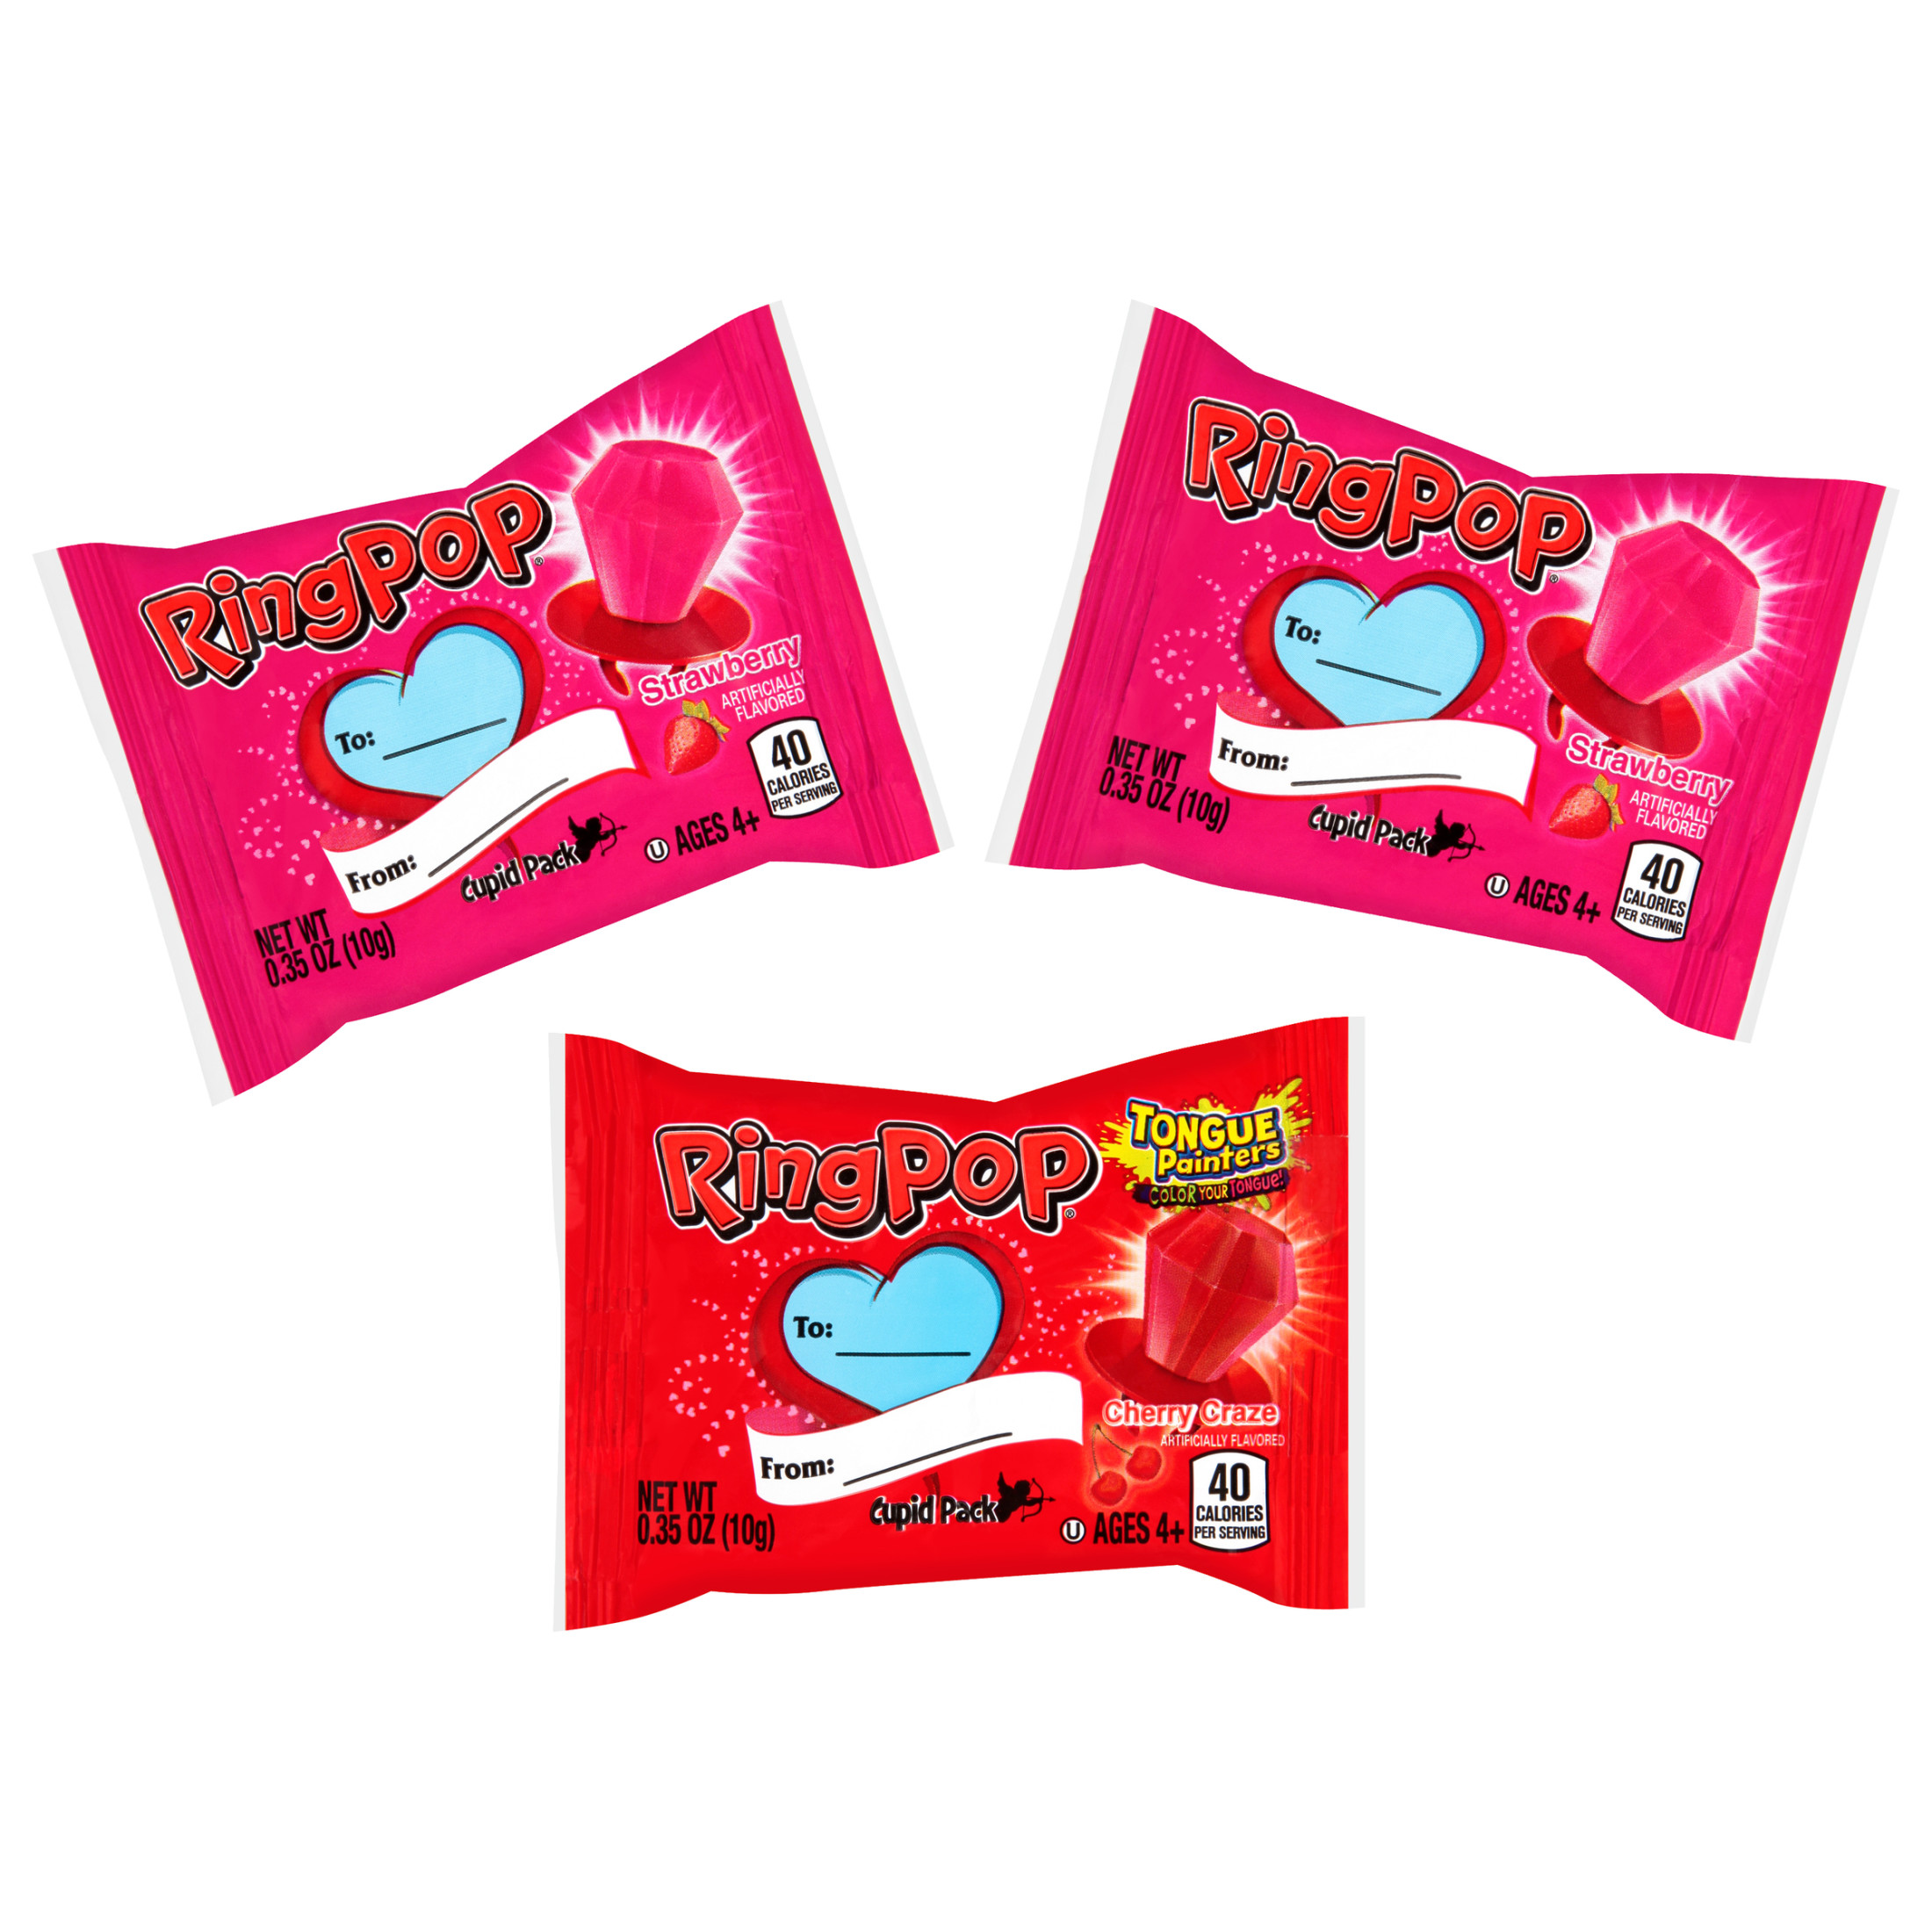 Ring Pop Valentine's Day Strawberry and Cherry Craze Lollipop Classroom Exchange Card (package), 3 Lollipops - image 5 of 8